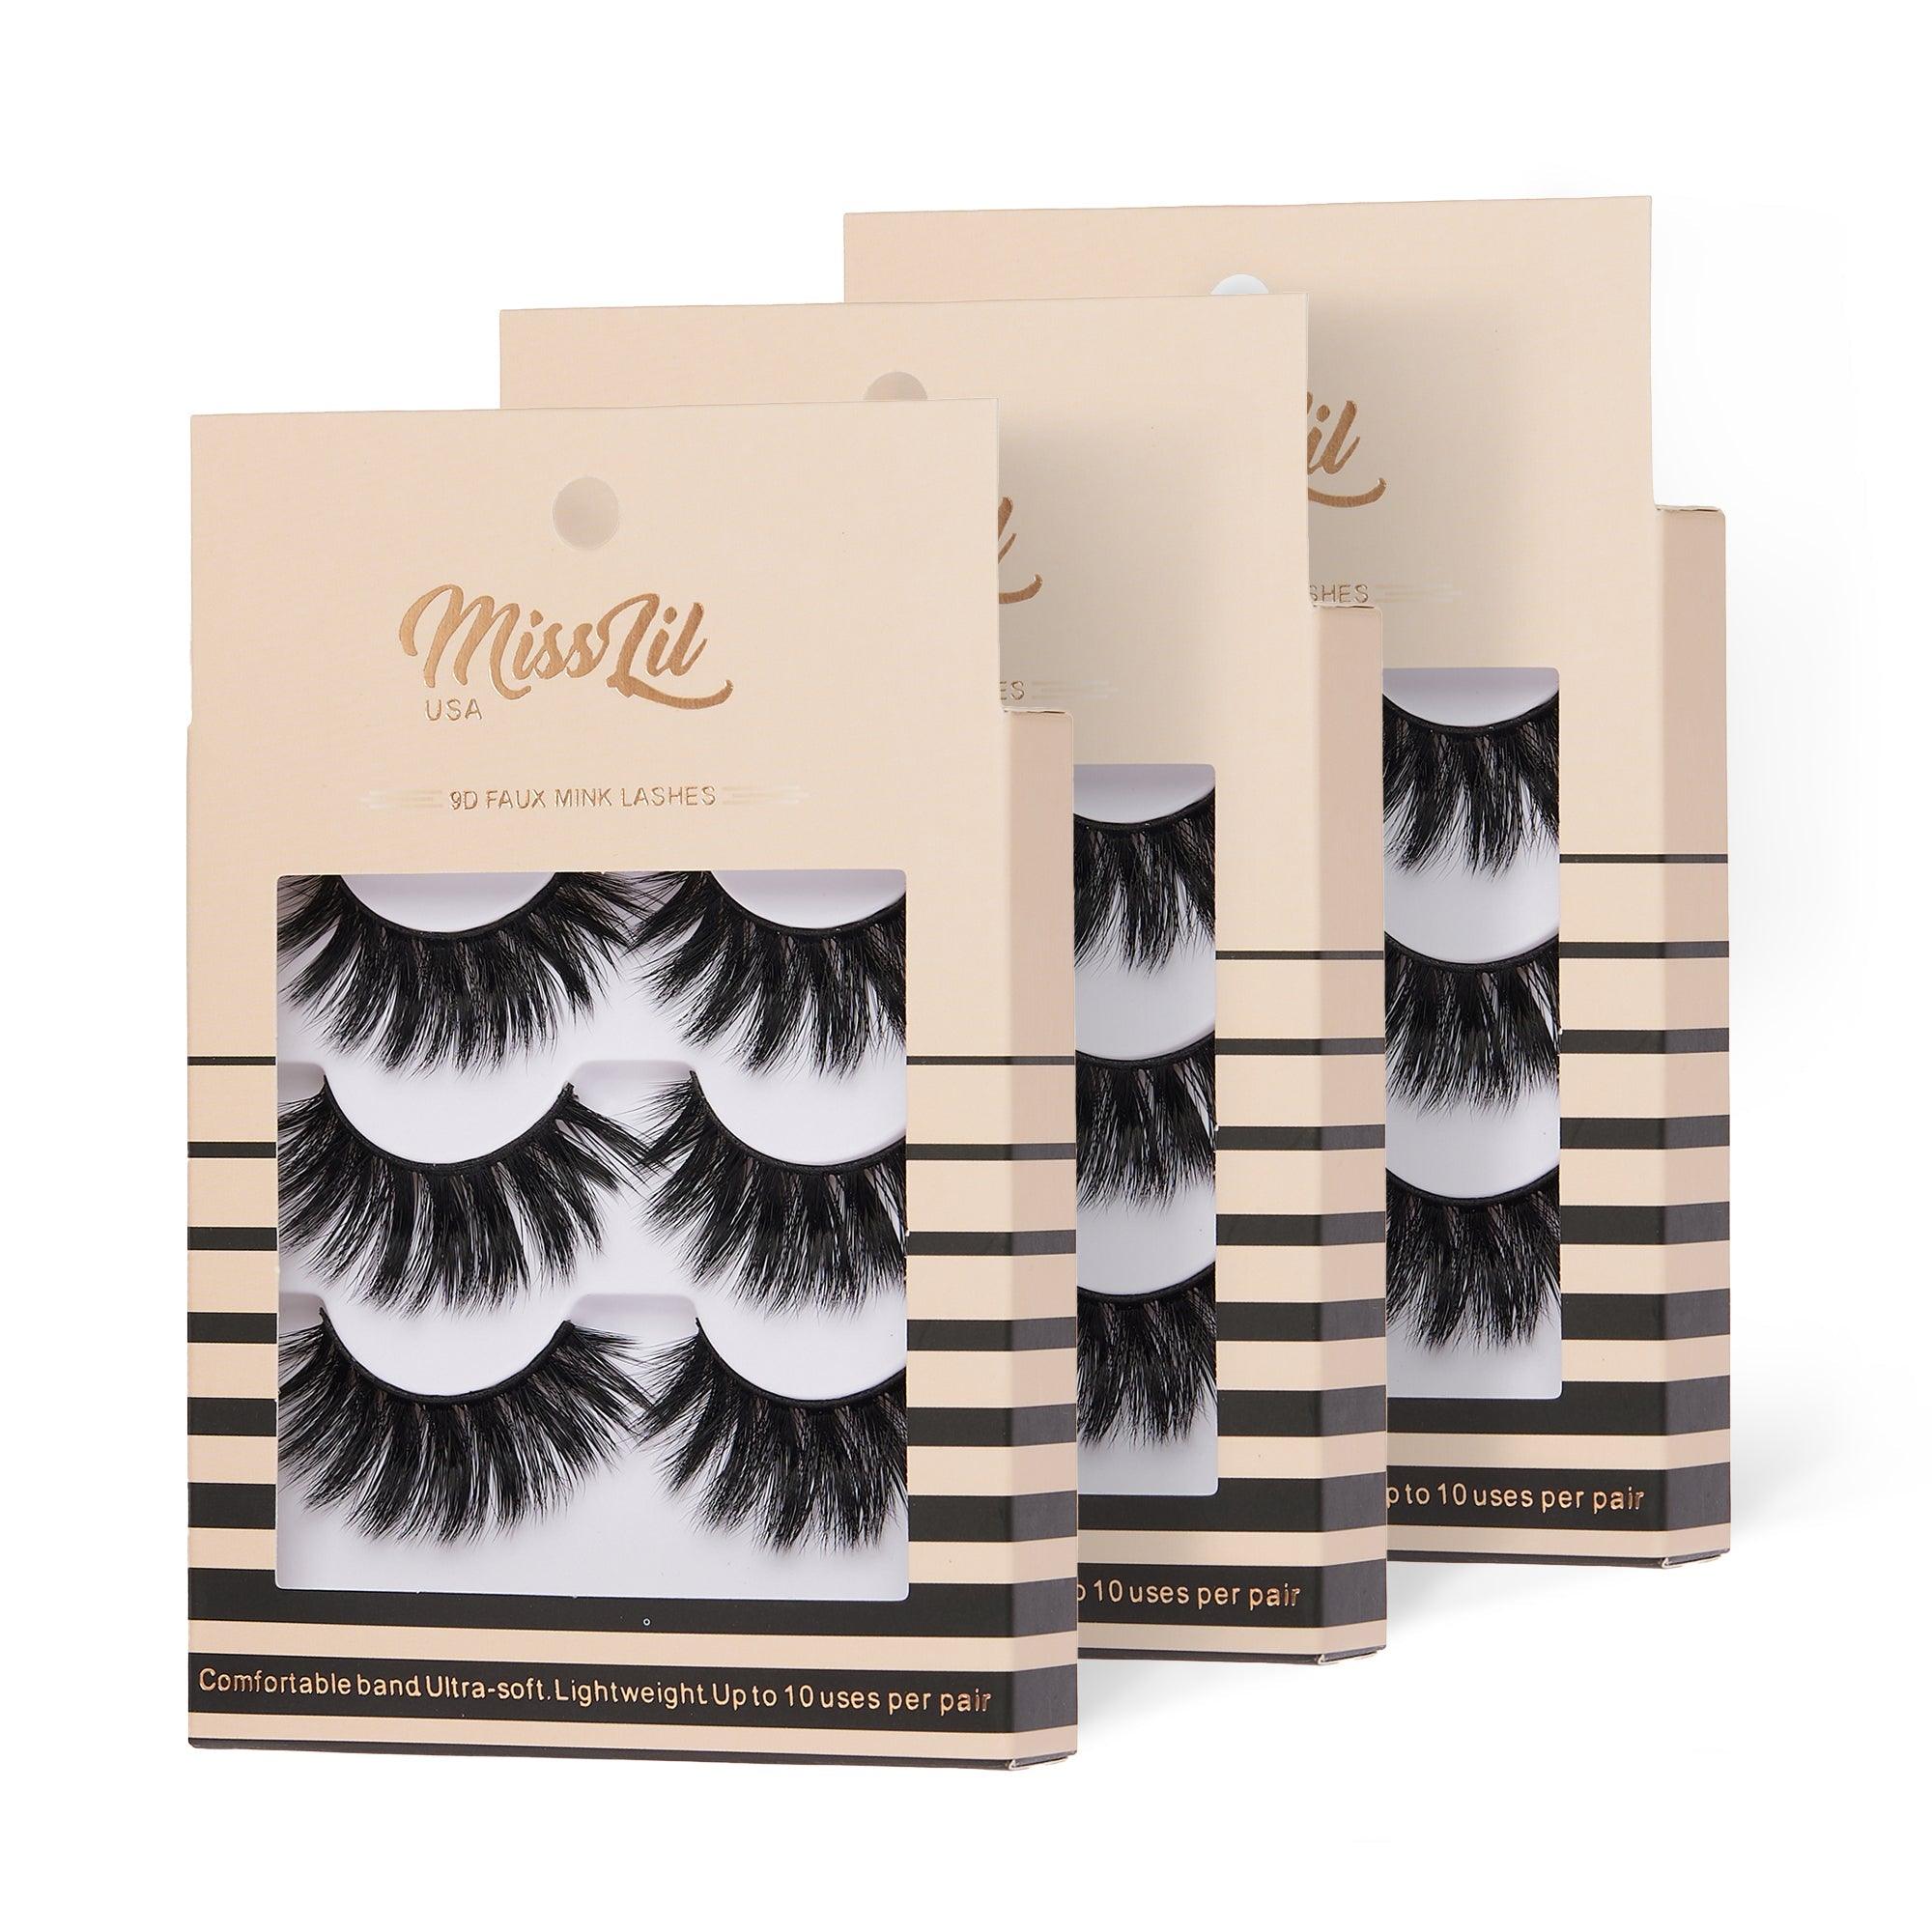 3-Pair Faux 9D Mink Eyelashes - Luxury Collection #4 - Pack of 12 - Miss Lil USA